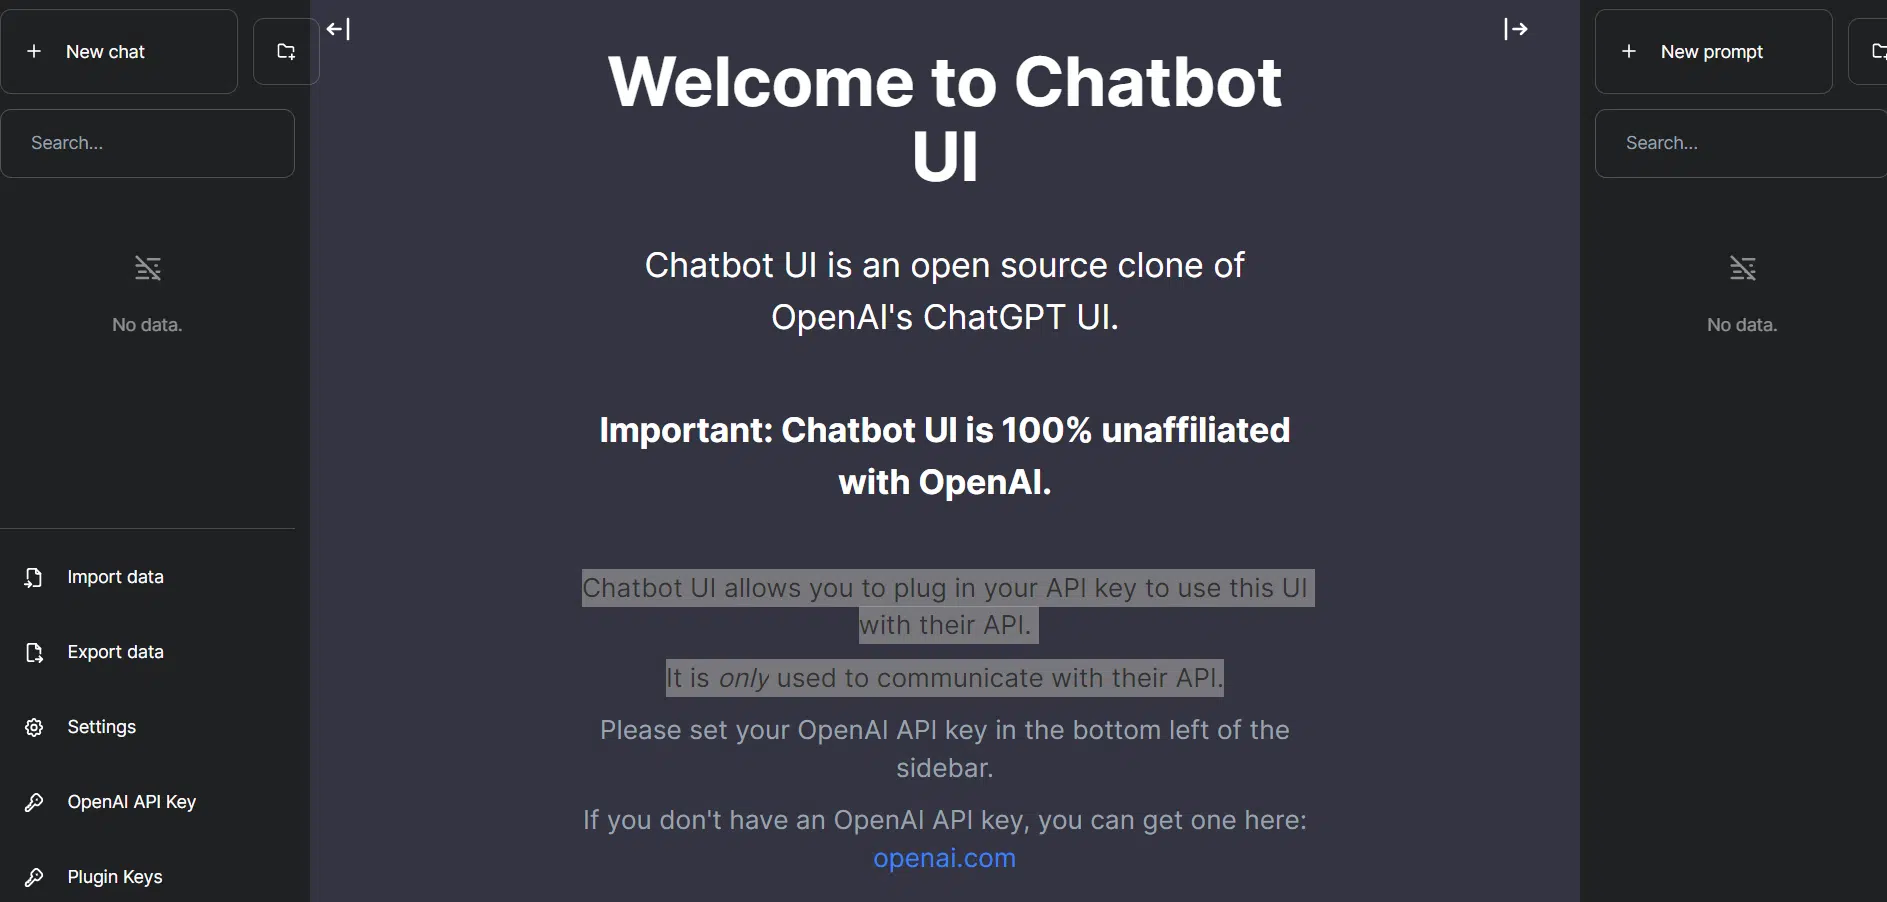 Chatbot UIwebsite picture